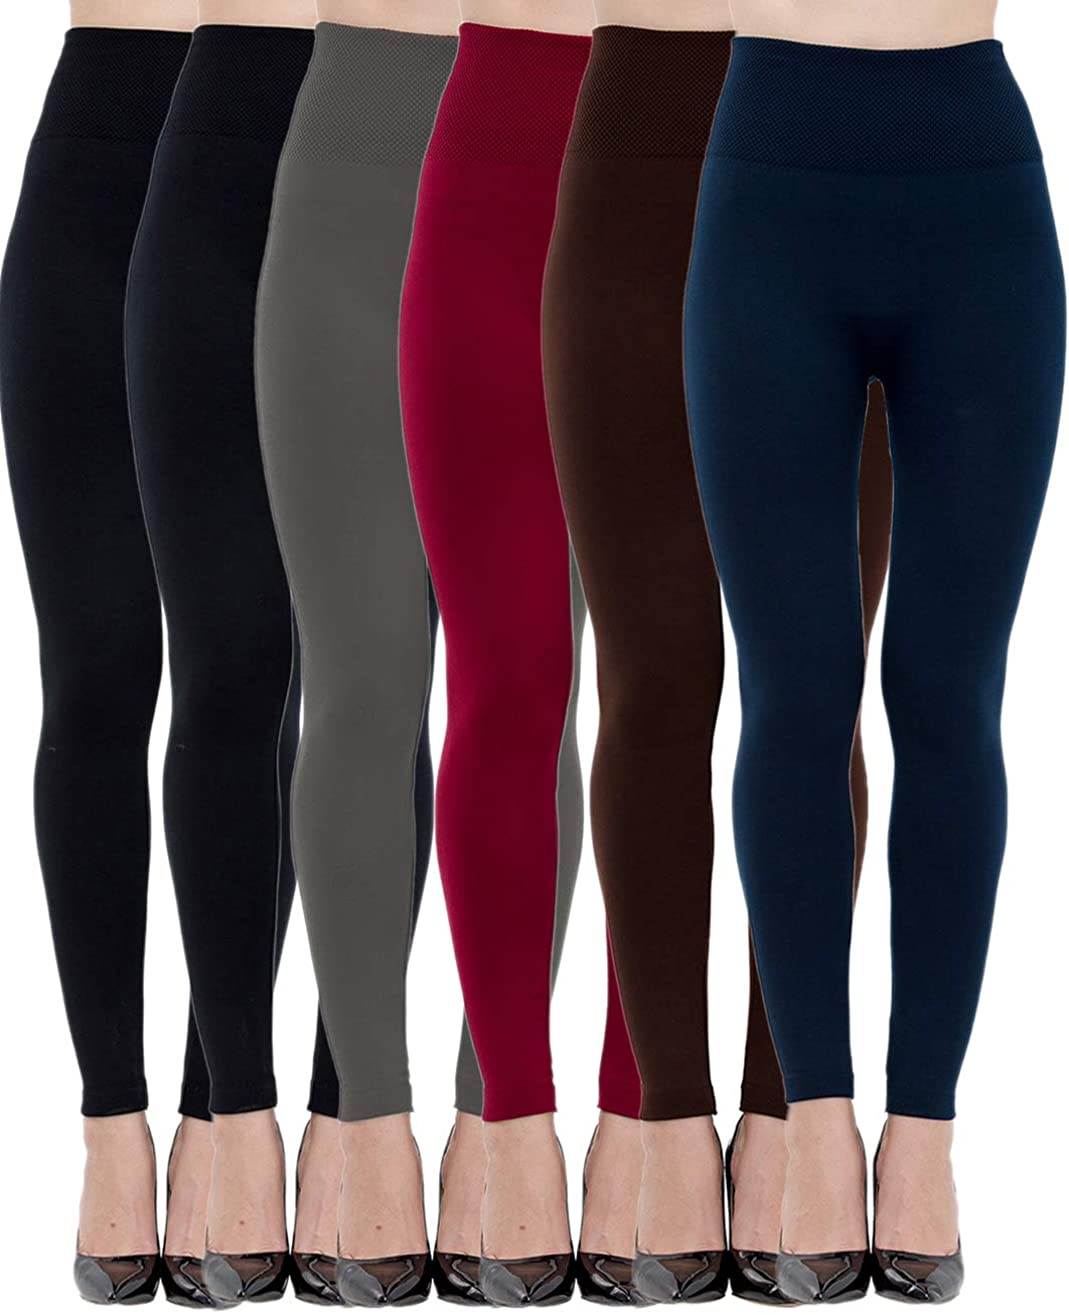 GOXIANG Thermal Leggings for Women Cold Weather Petite Fleece Lined Winter  Warm Tights Pants Tummy Control Womens Leggings